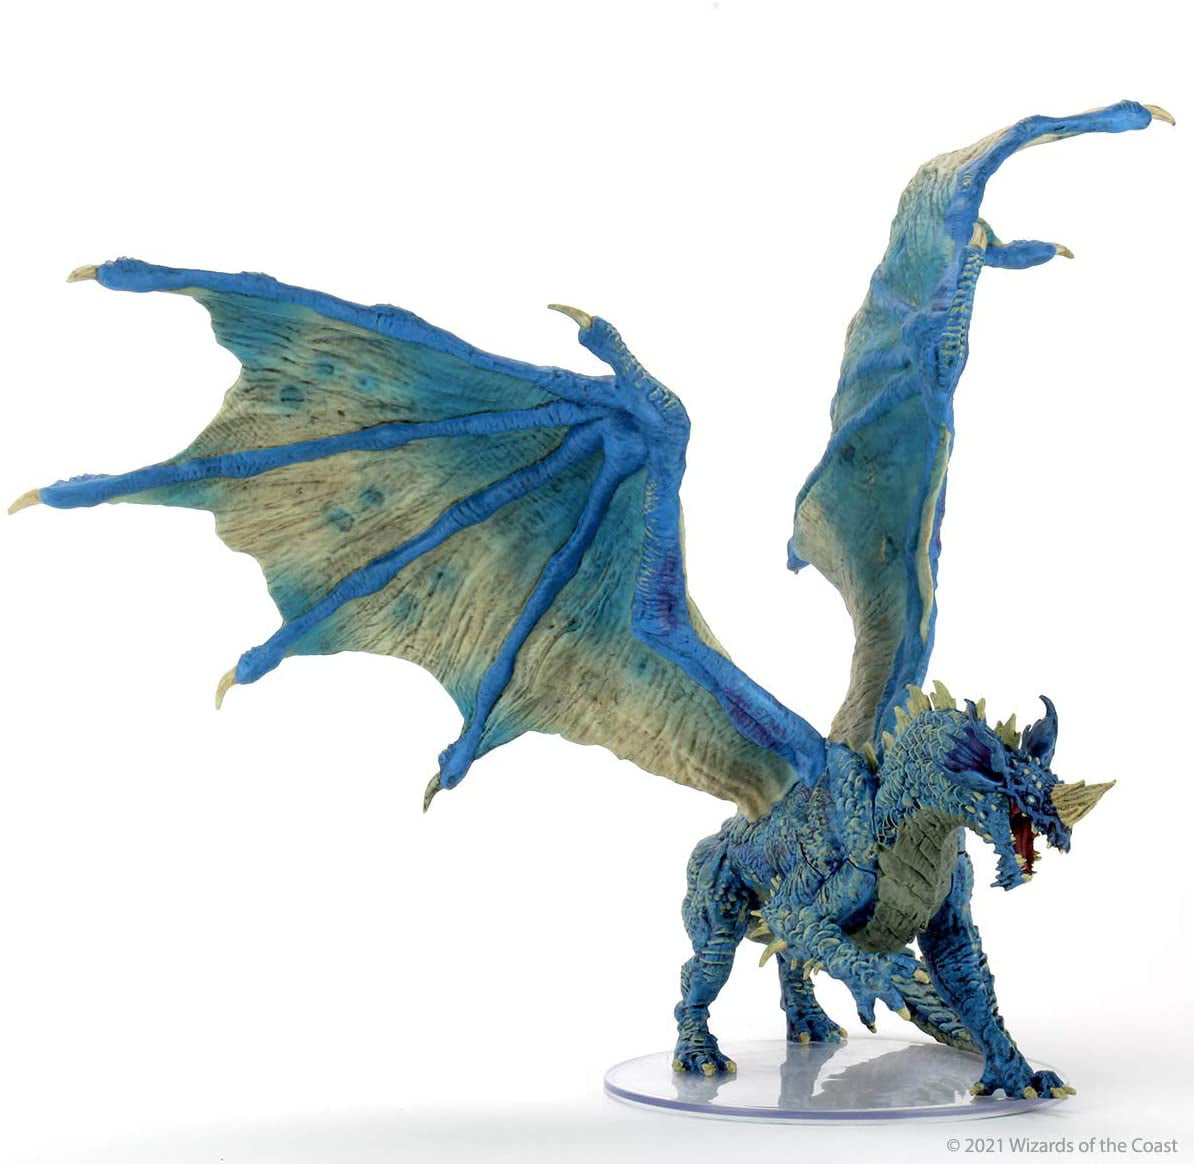 Discount Applicable – Shop Dungeon & Dragons powered by WizKids